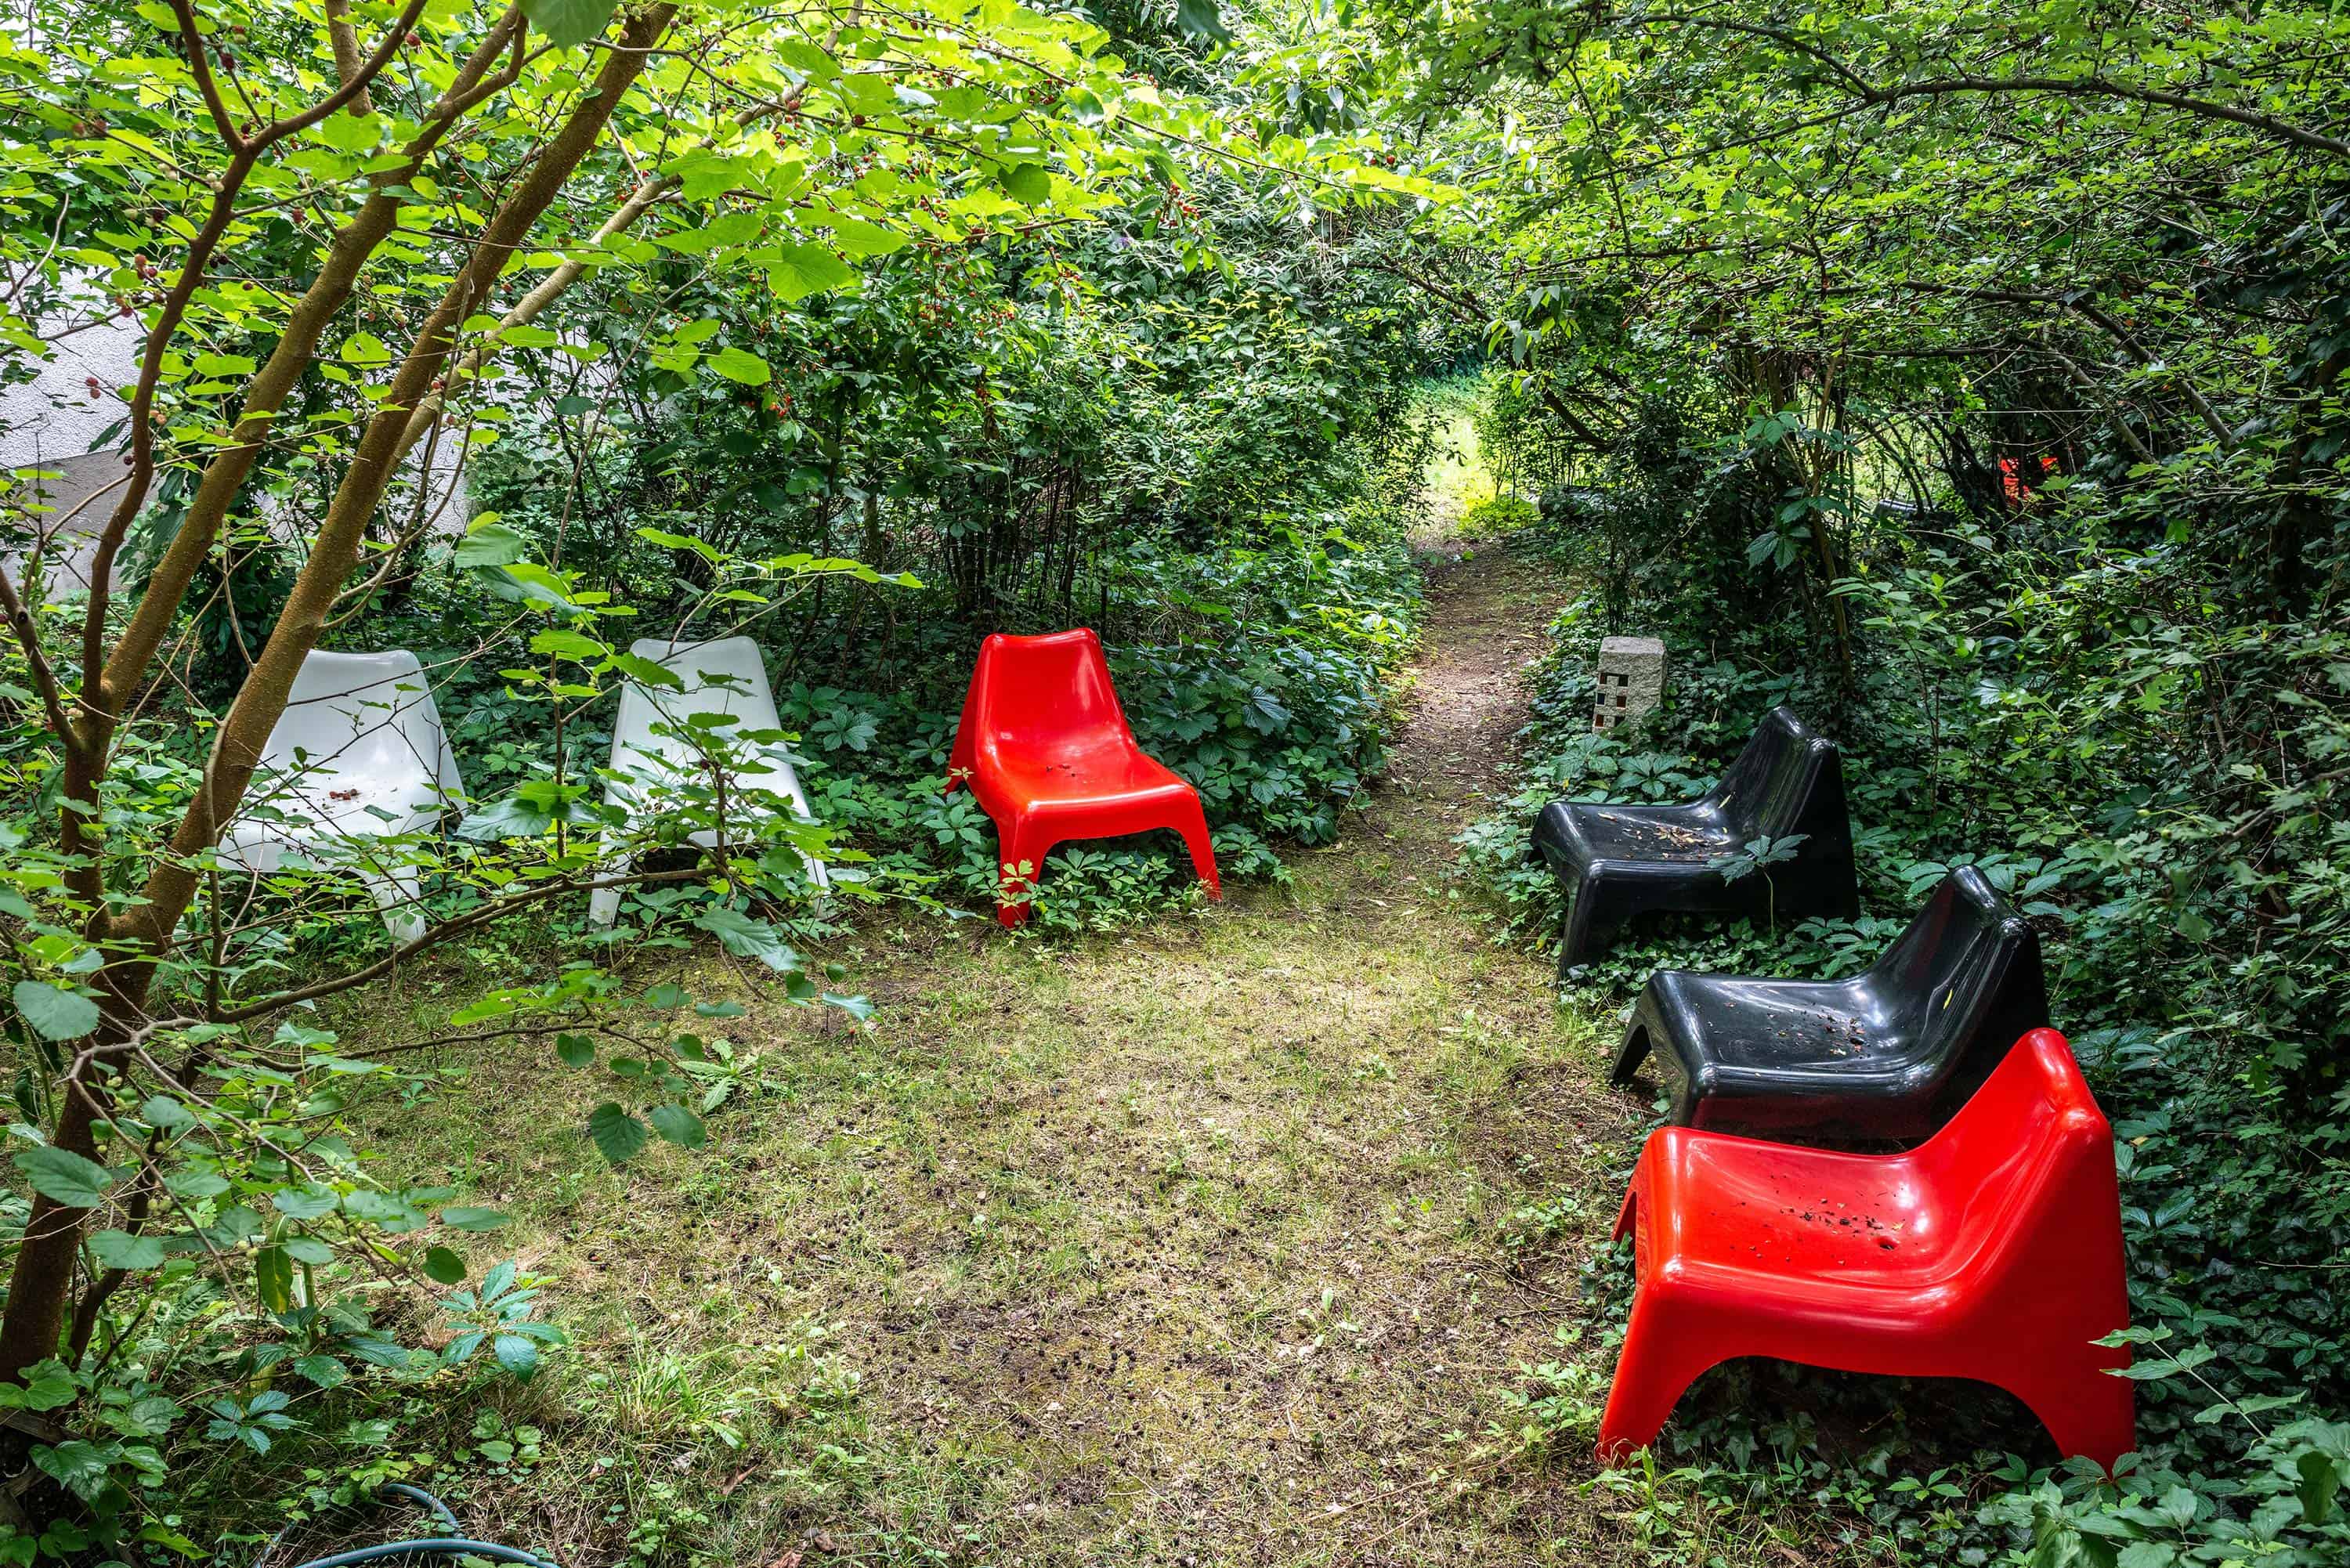 Seating in the garden